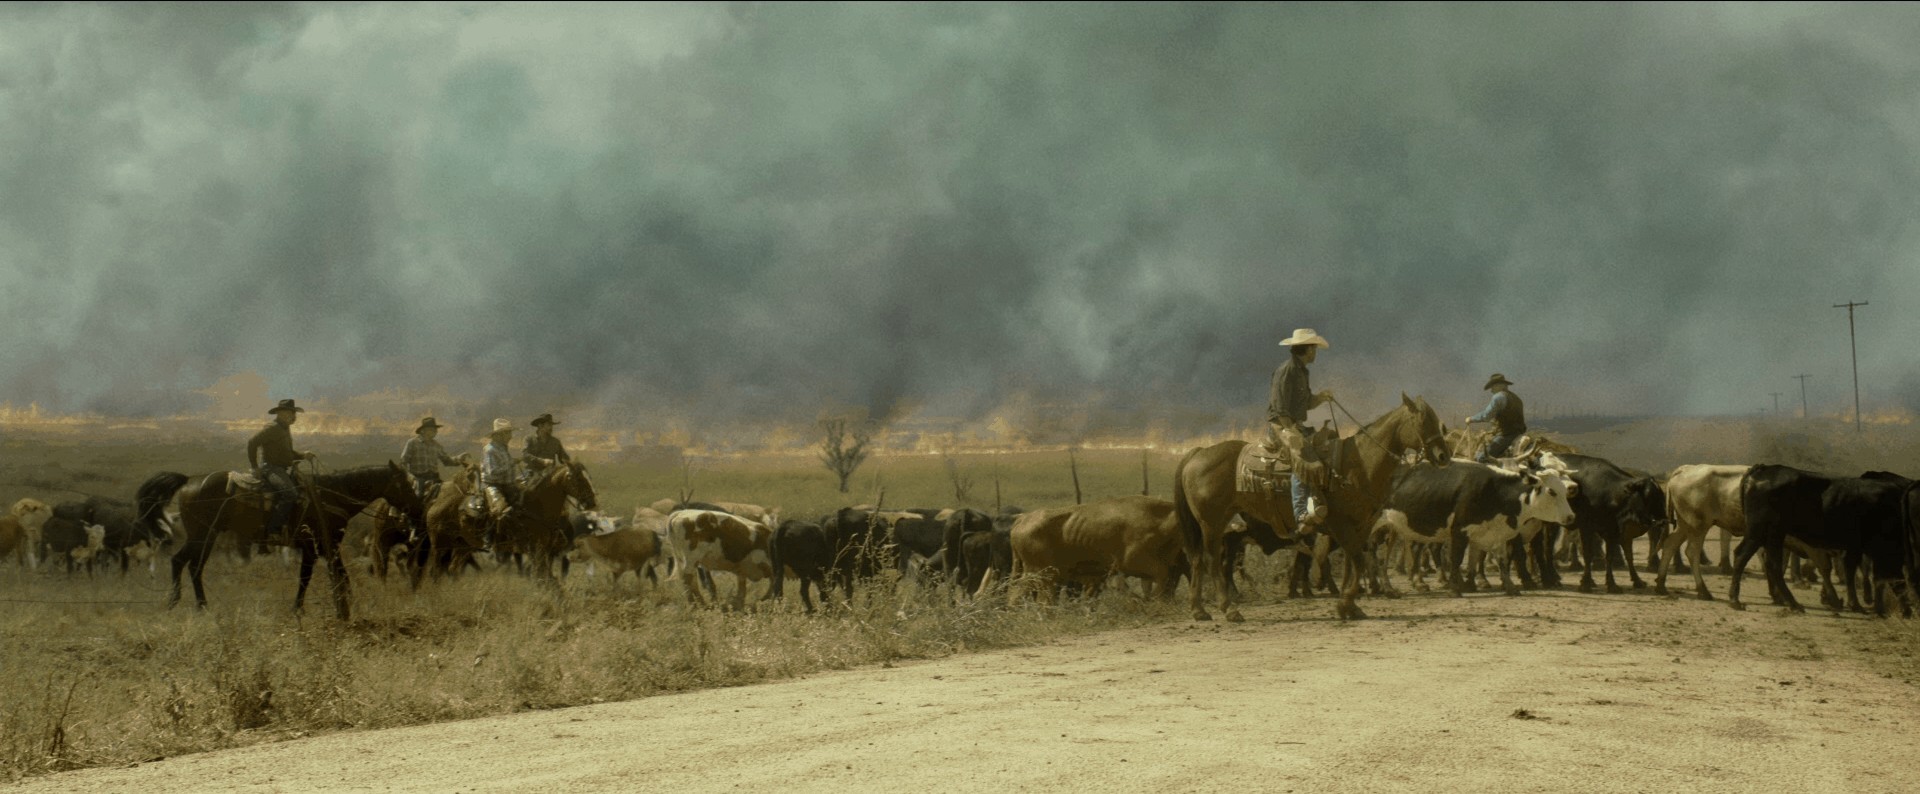 from the film Hell Or High Water